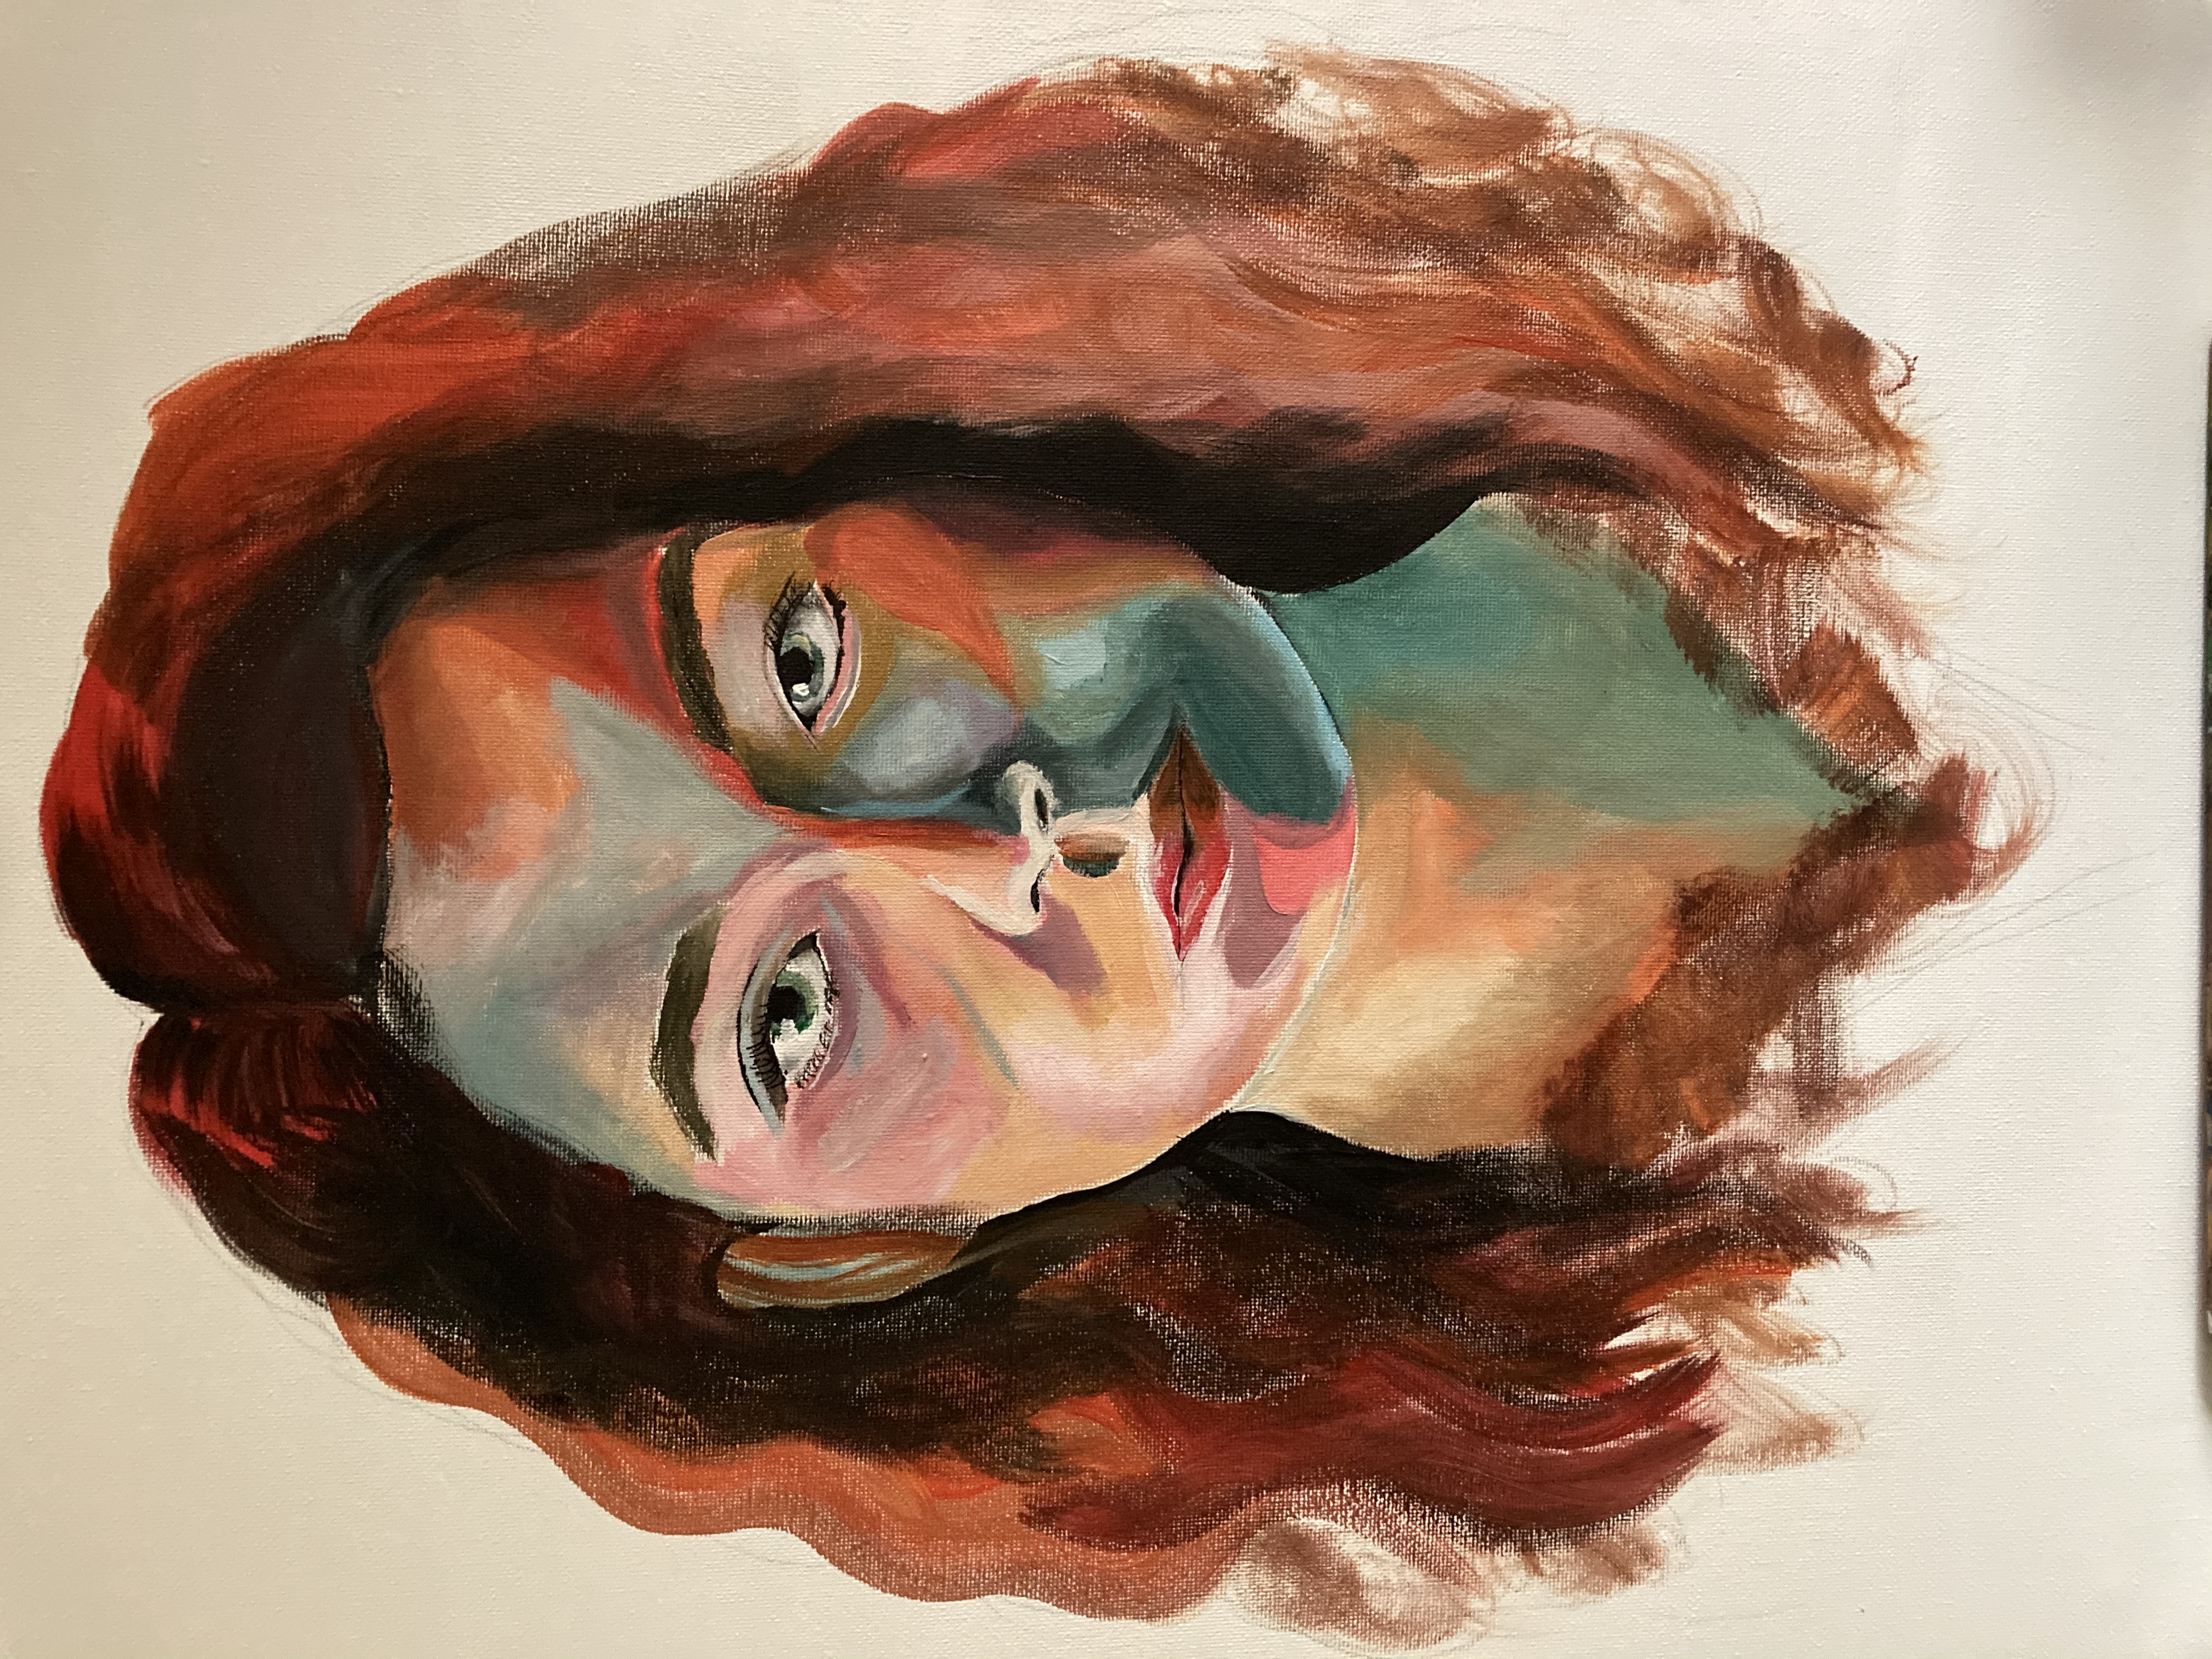 Here is my most recent piece of work for my a-level artwork. It is a colourful portrait of a good friend of mine